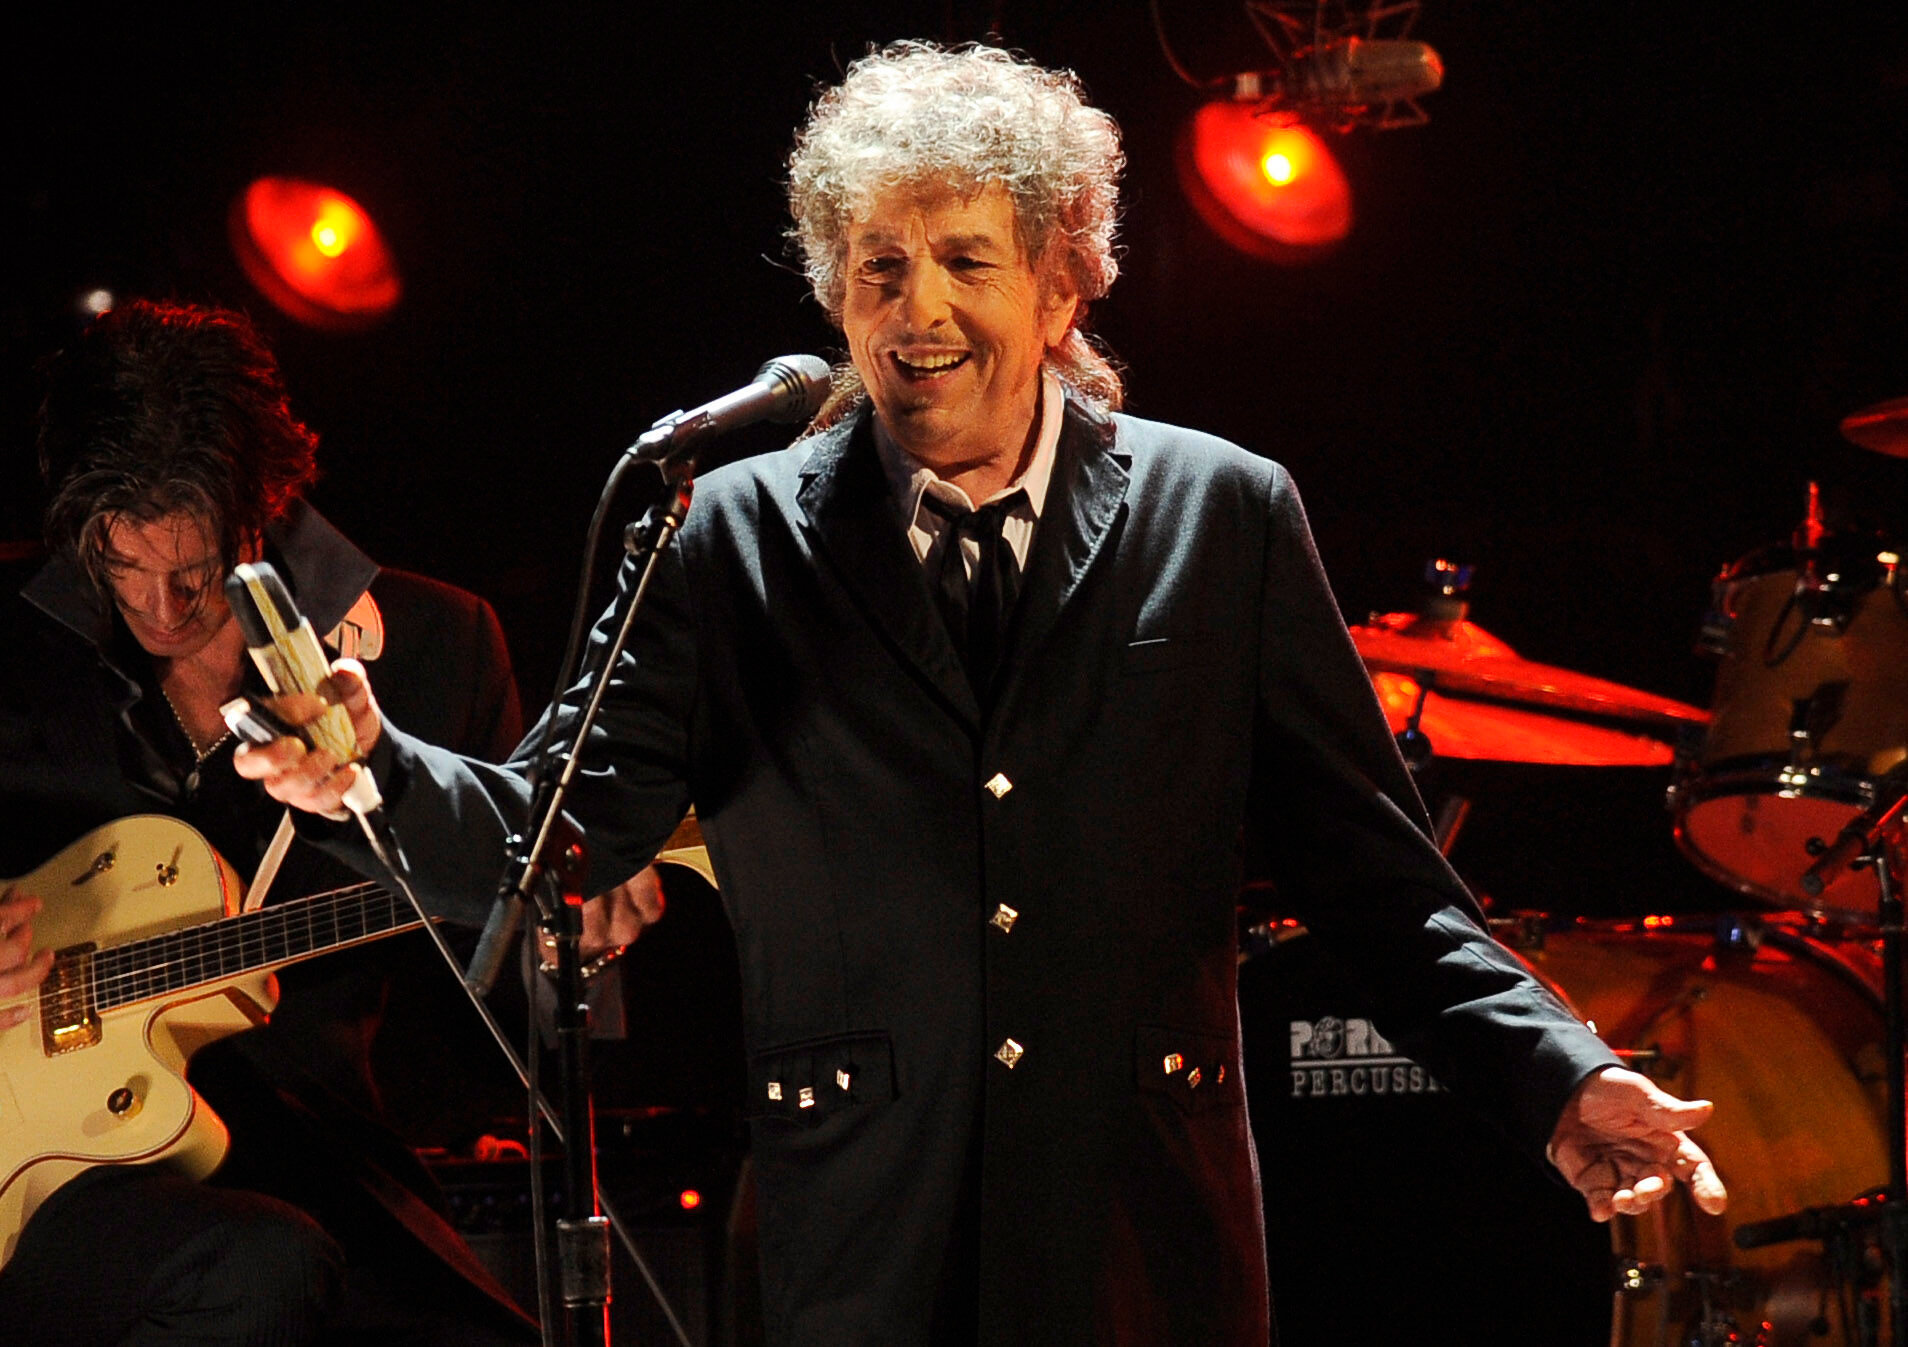 Happy Birthday Bob Dylan who is 80 today. Love listening and playing your music! 